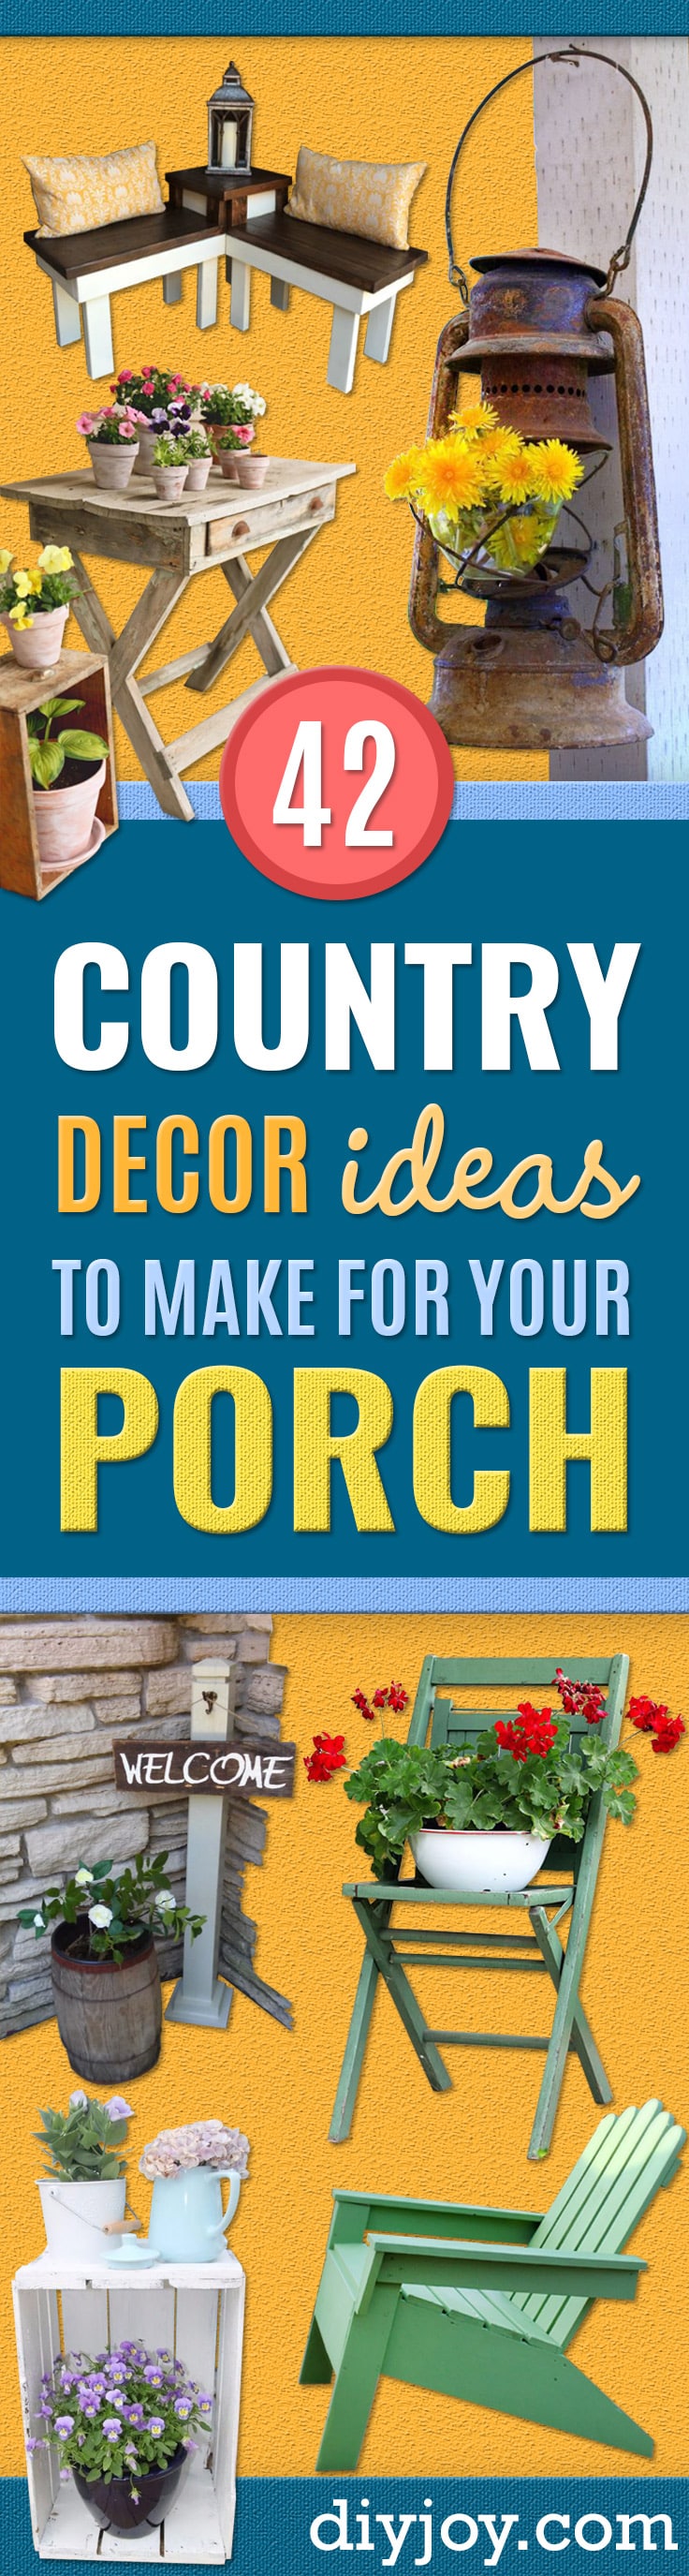 Best Country Decor Ideas for Your Porch - Rustic Farmhouse Decor Tutorials and Easy Vintage Shabby Chic Home Decor for Kitchen, Living Room and Bathroom - Creative Country Crafts, Furniture, Patio Decor and Rustic Wall Art and Accessories to Make and Sell